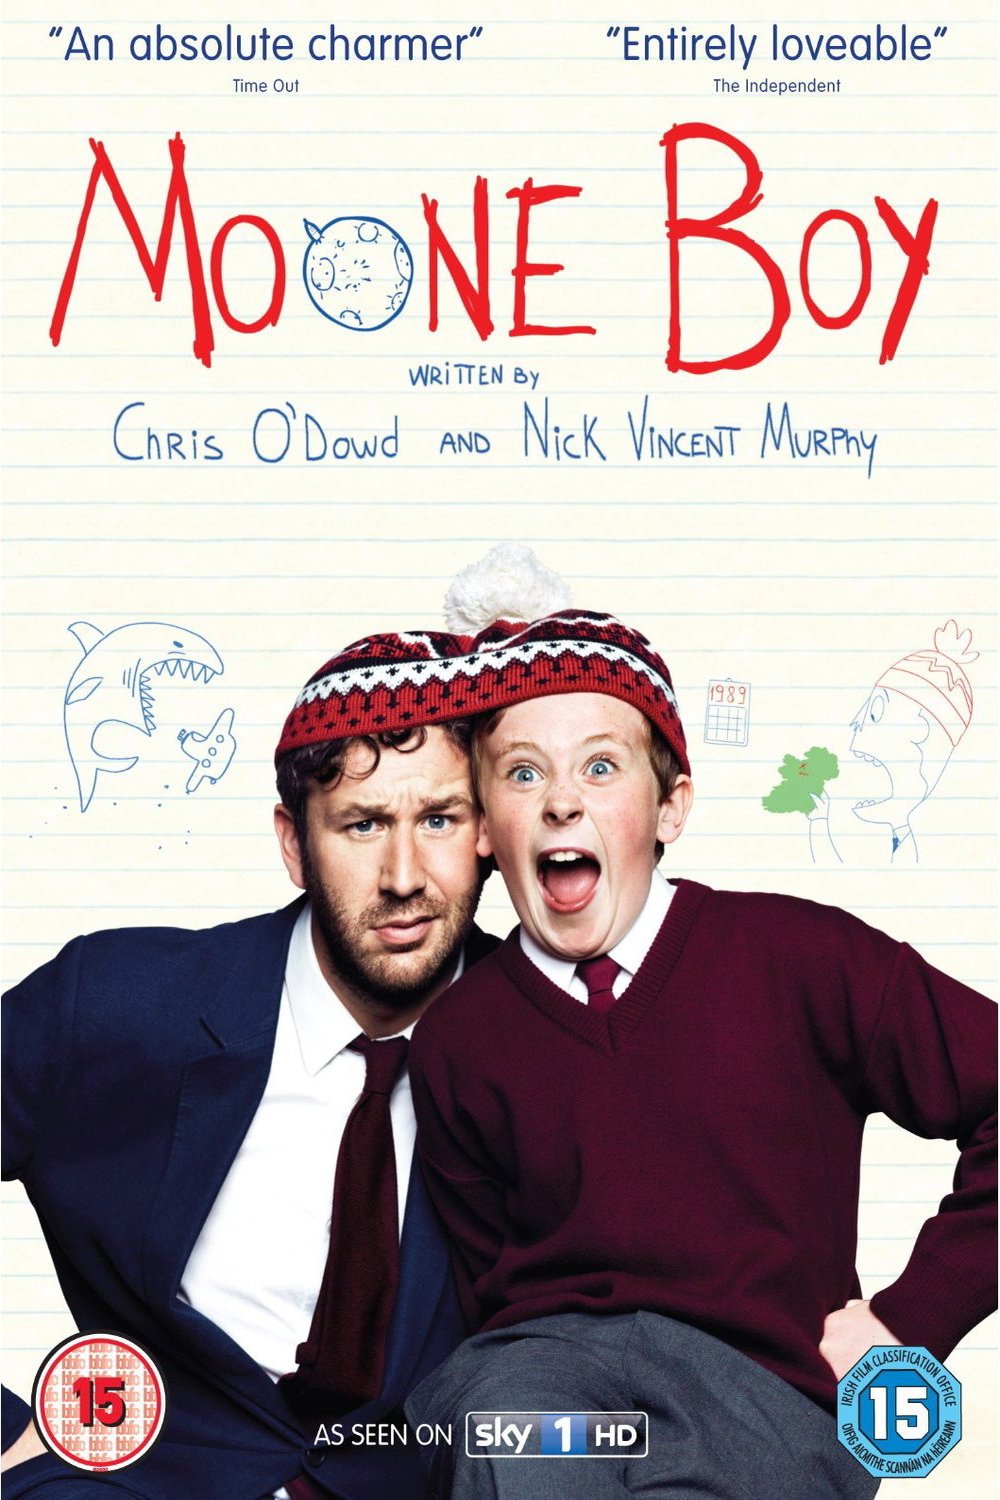 Poster of the movie Moone Boy